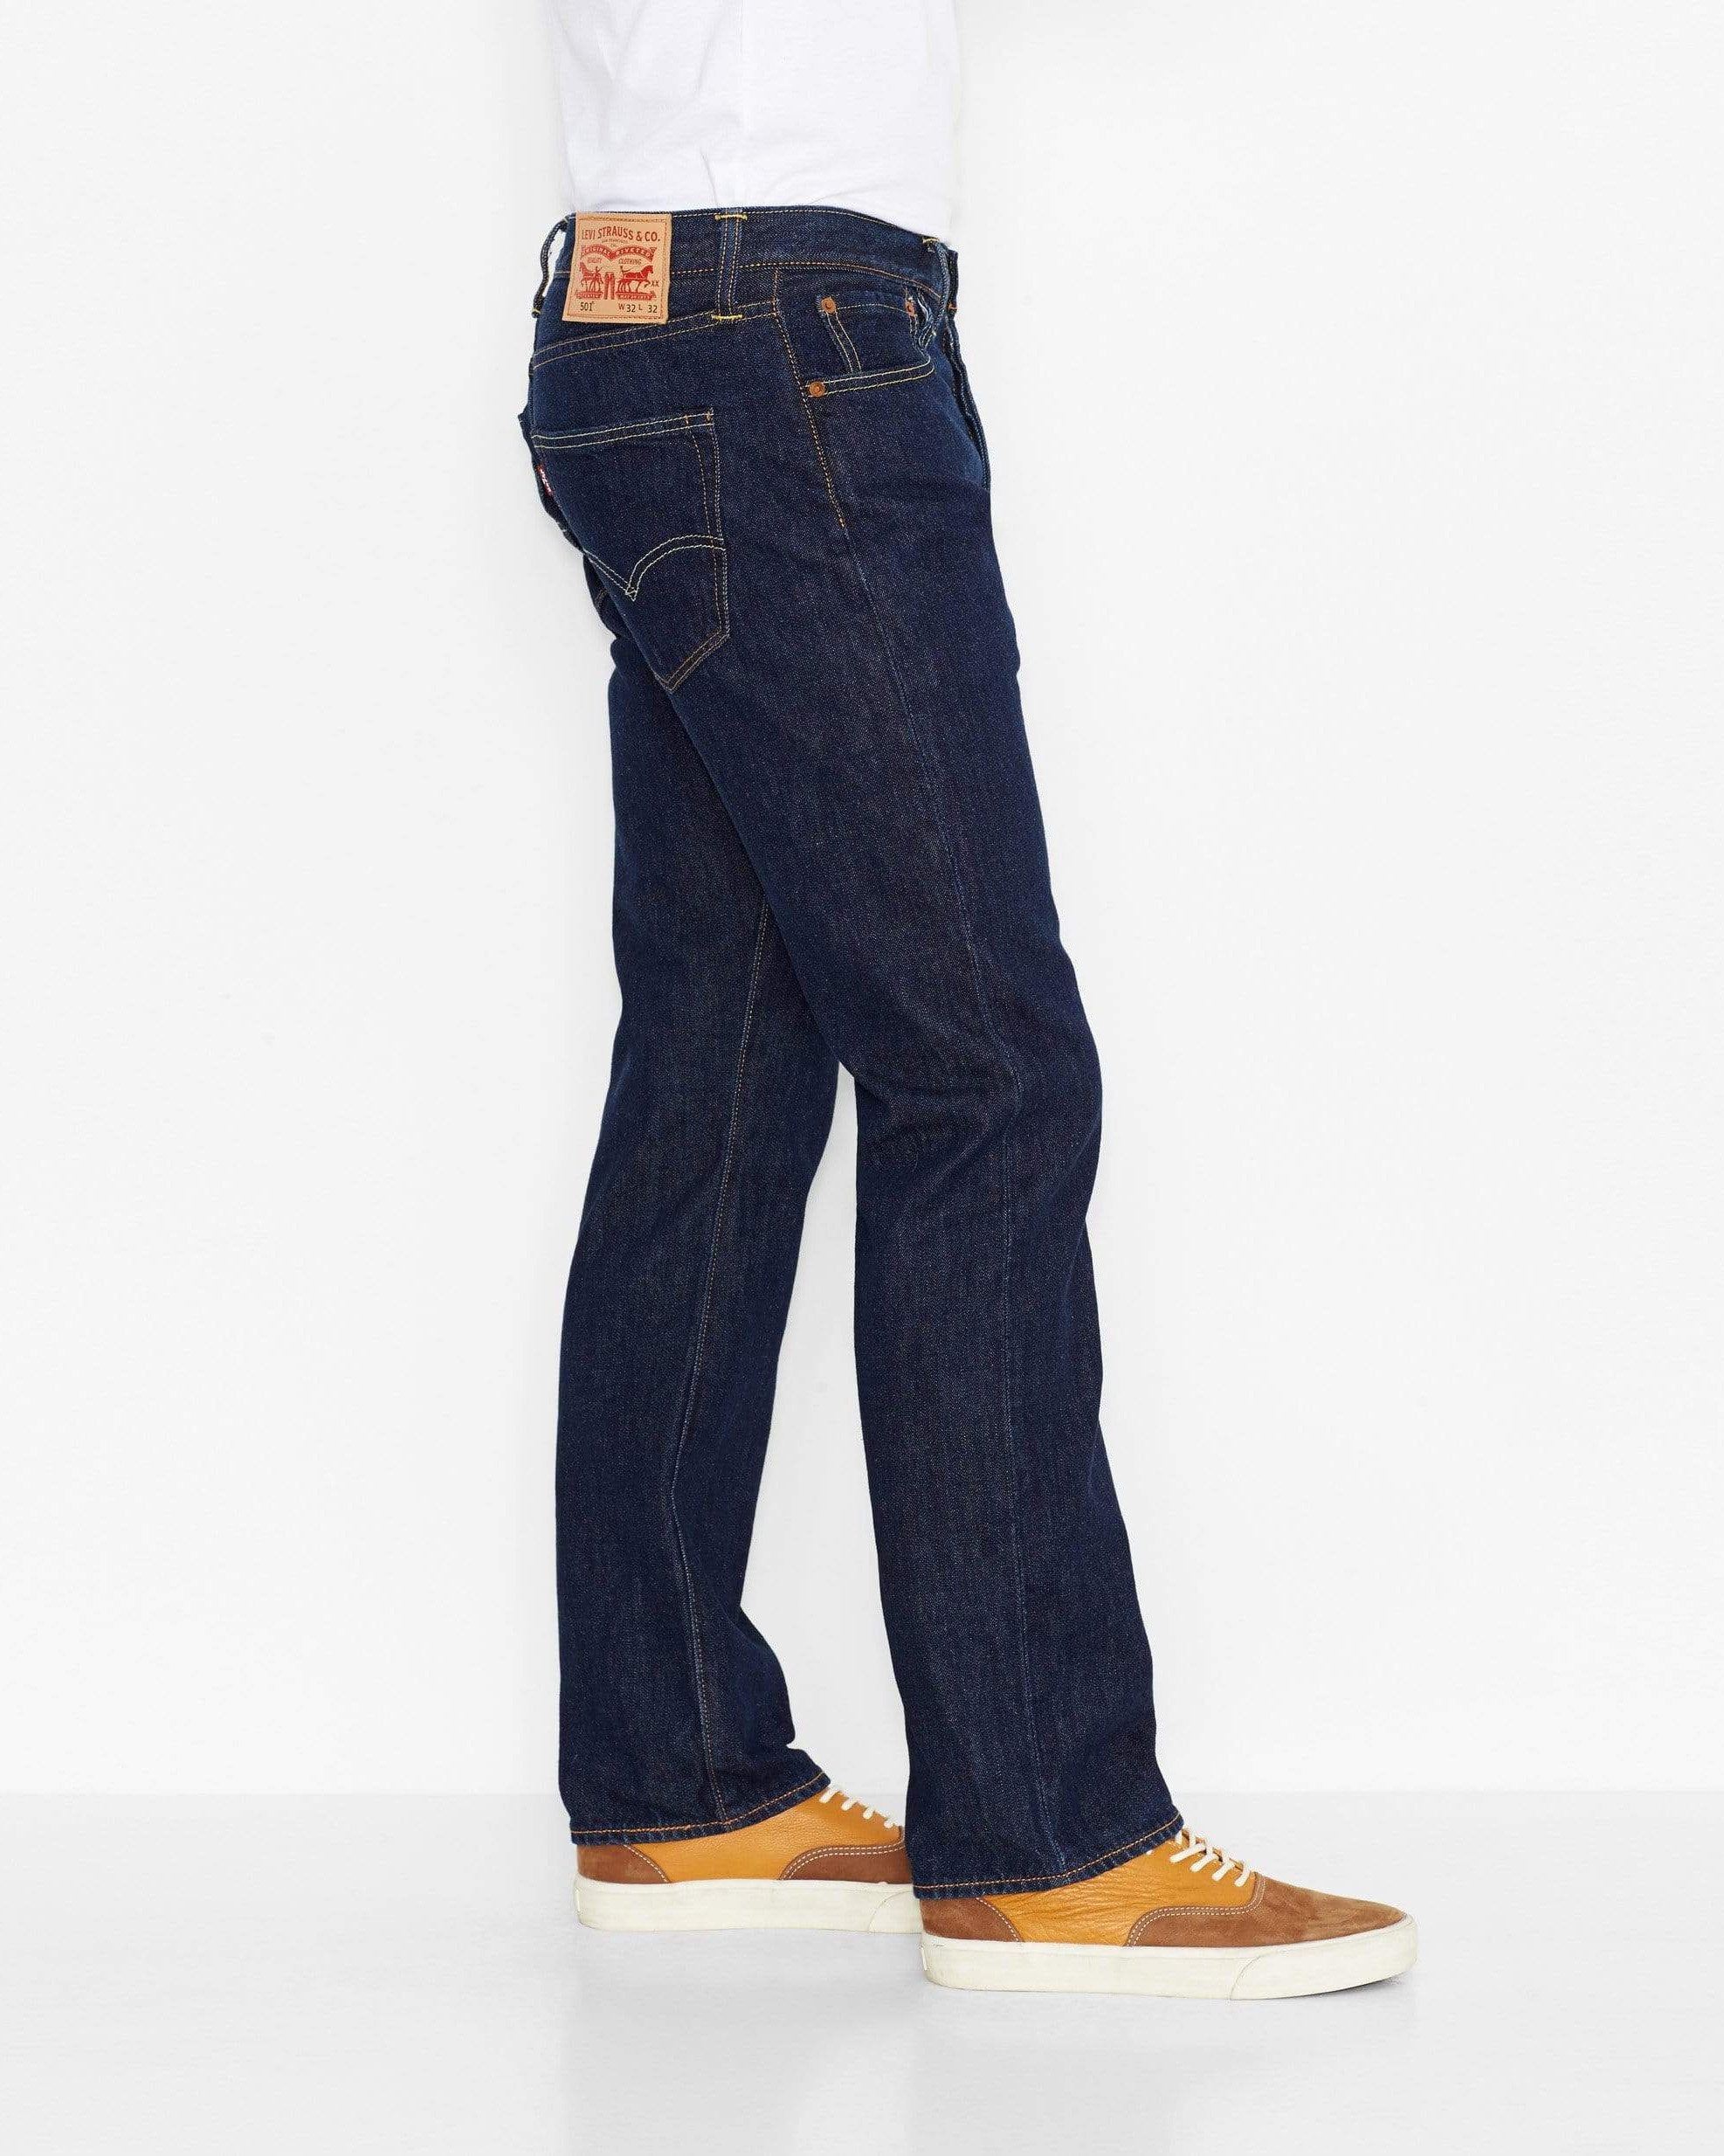 Levis 501 Original Regular Fit Mens Jeans - Onewash Blue - and Street Fashion from Jeanstore